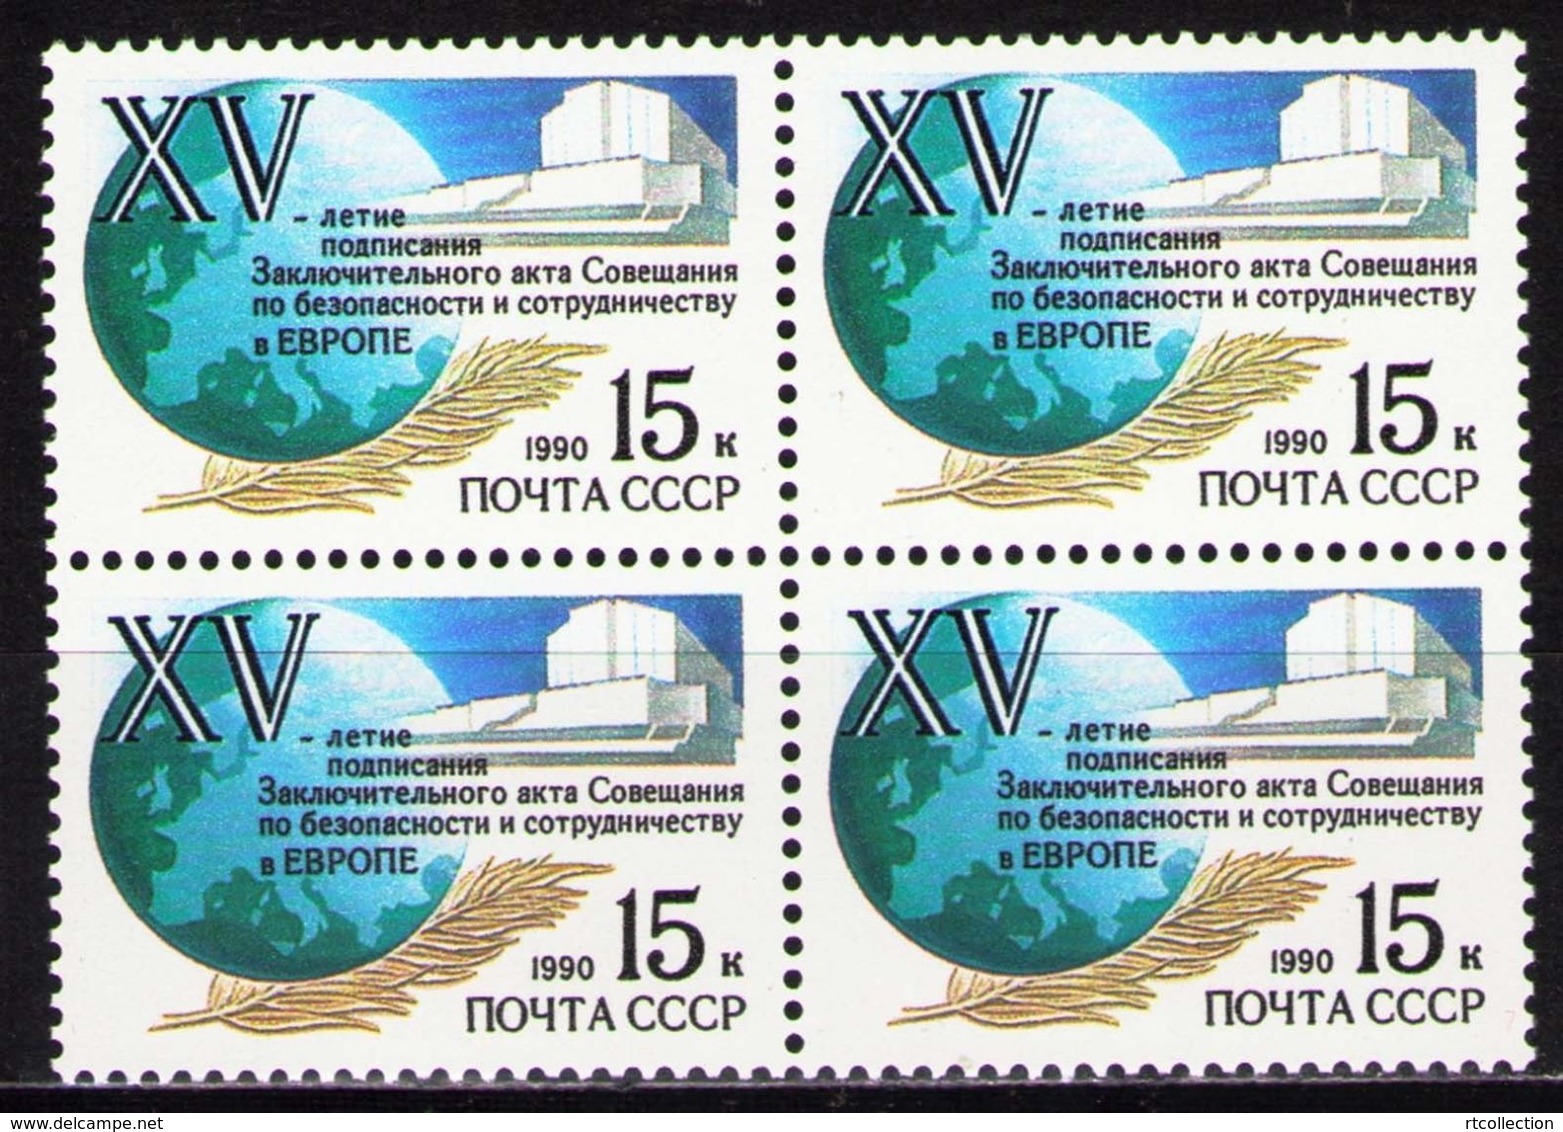 USSR Russia 1990 Block 15th Anni European Security Co-operation Conference Celebrations Stamps MNH Sc 5900 Mi 6093 - European Community